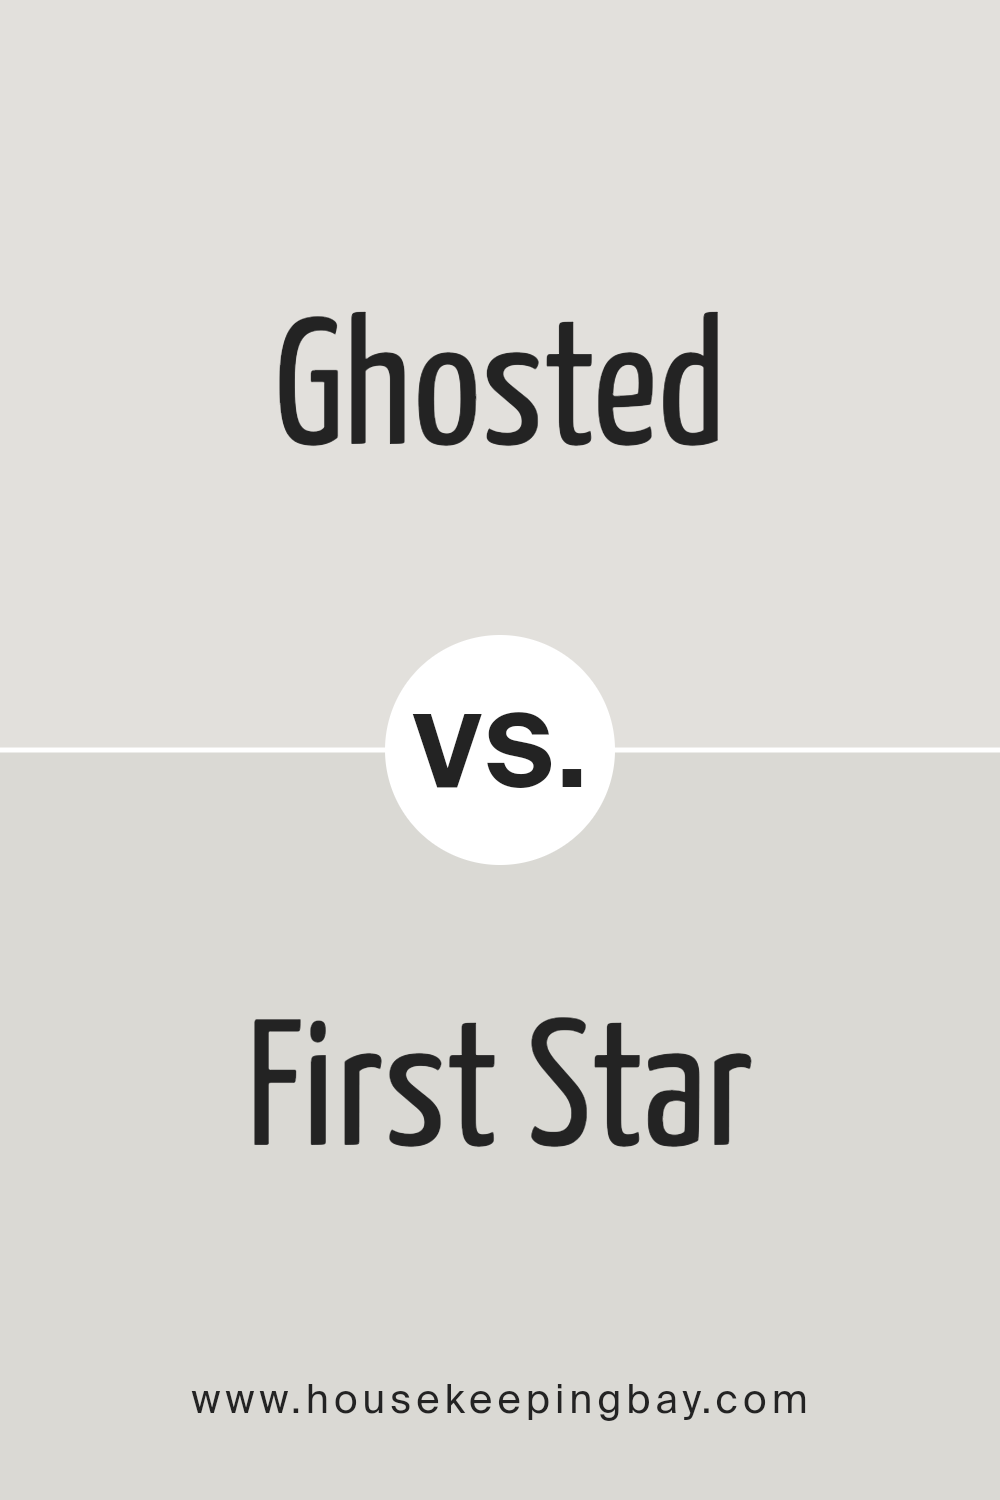 ghosted_sw_9545_vs_first_star_sw_7646